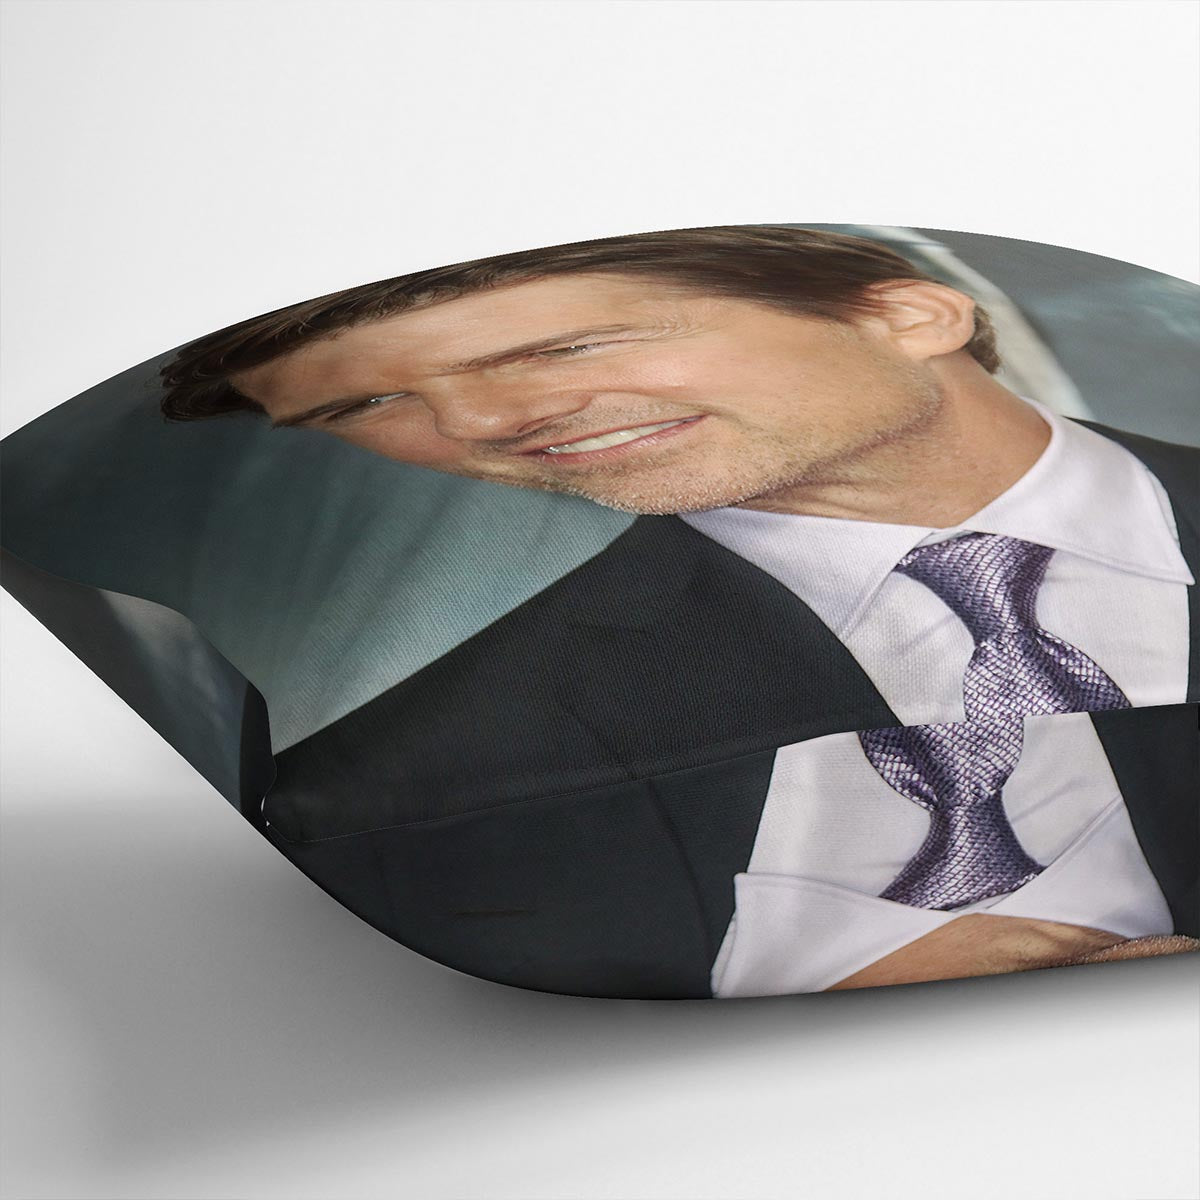 Tom Cruise Mission Impossible Fallout Cushion